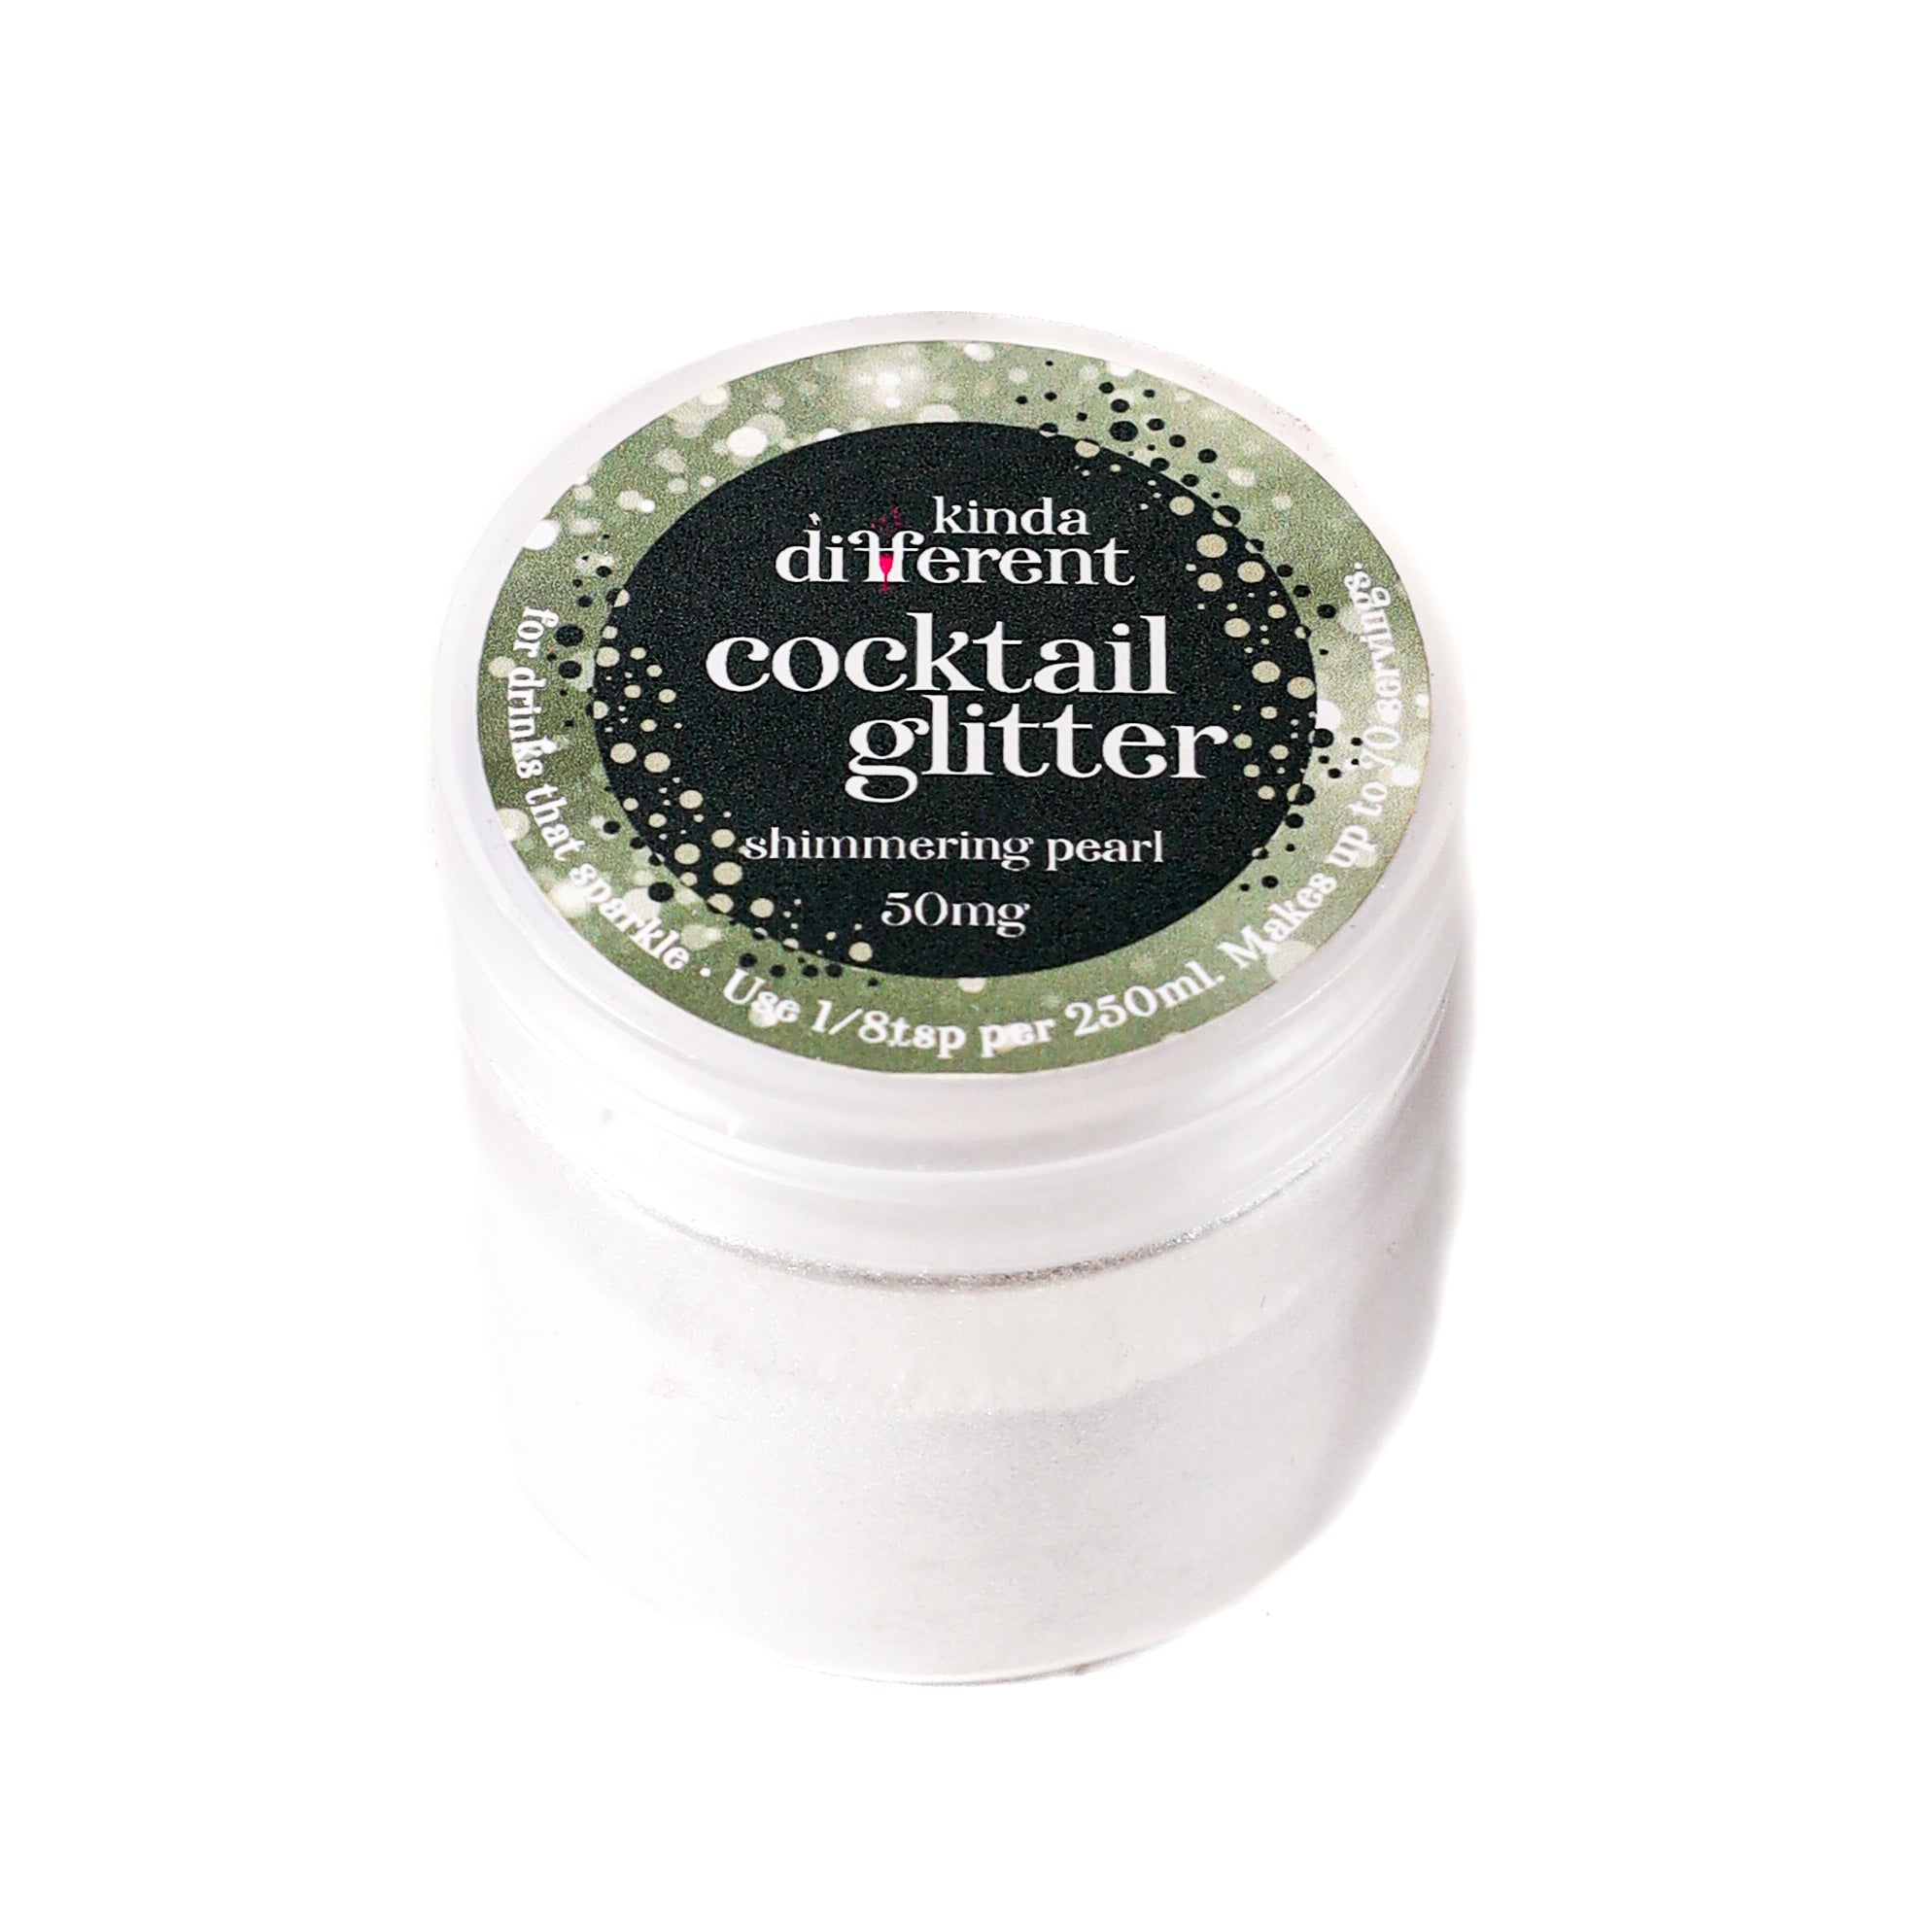 Cocktail Glitter - Shimmering Pearl